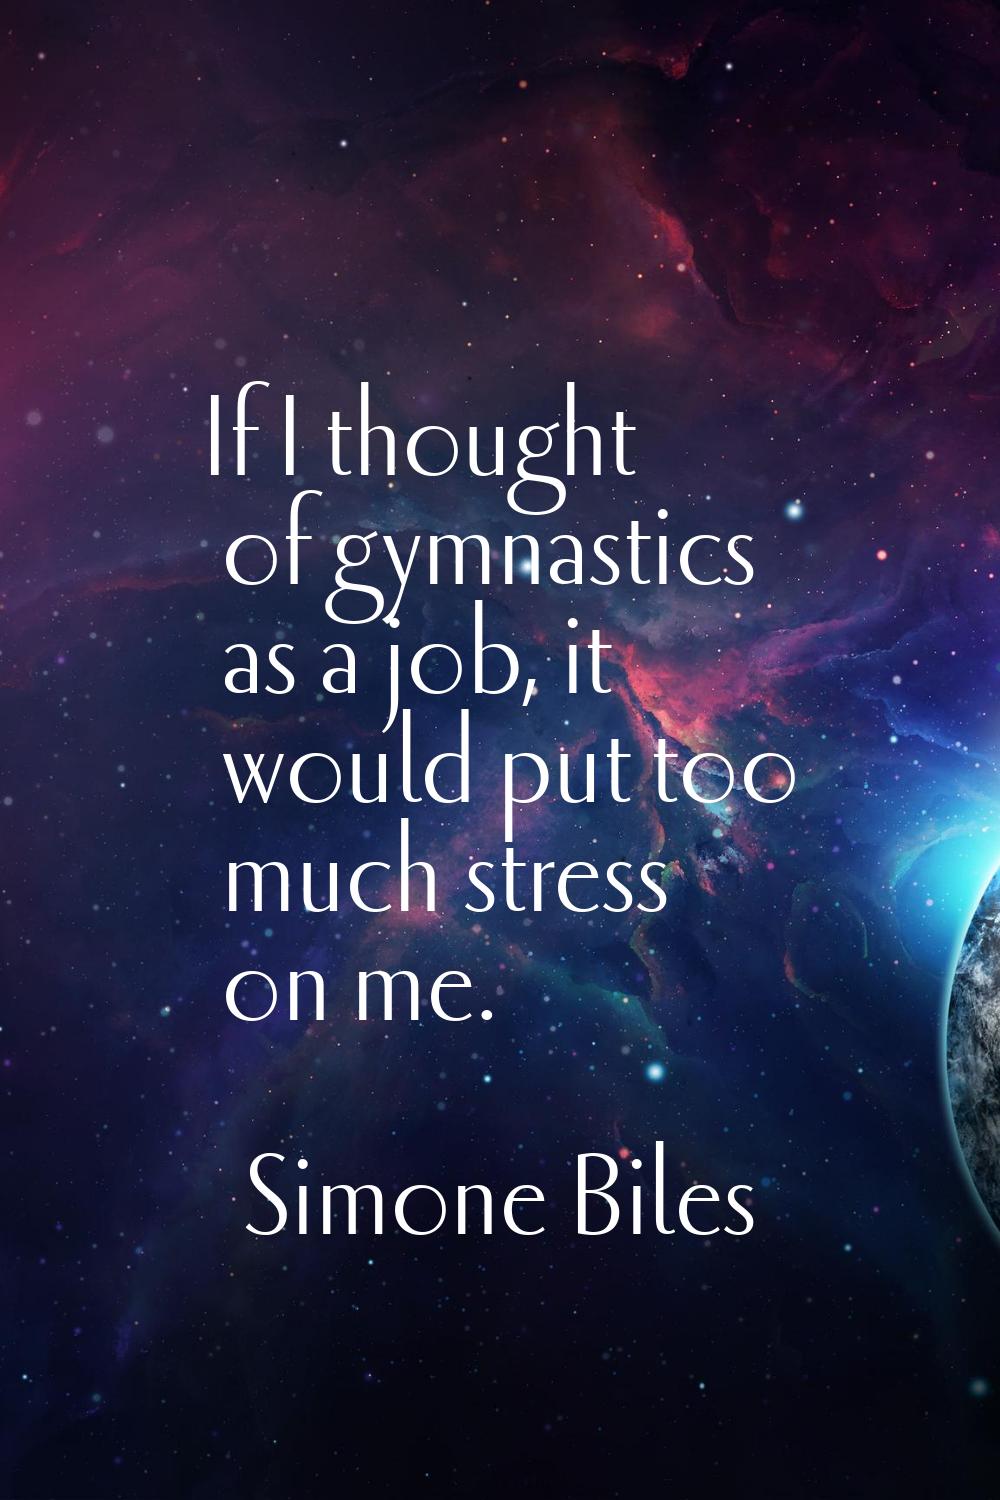 If I thought of gymnastics as a job, it would put too much stress on me.